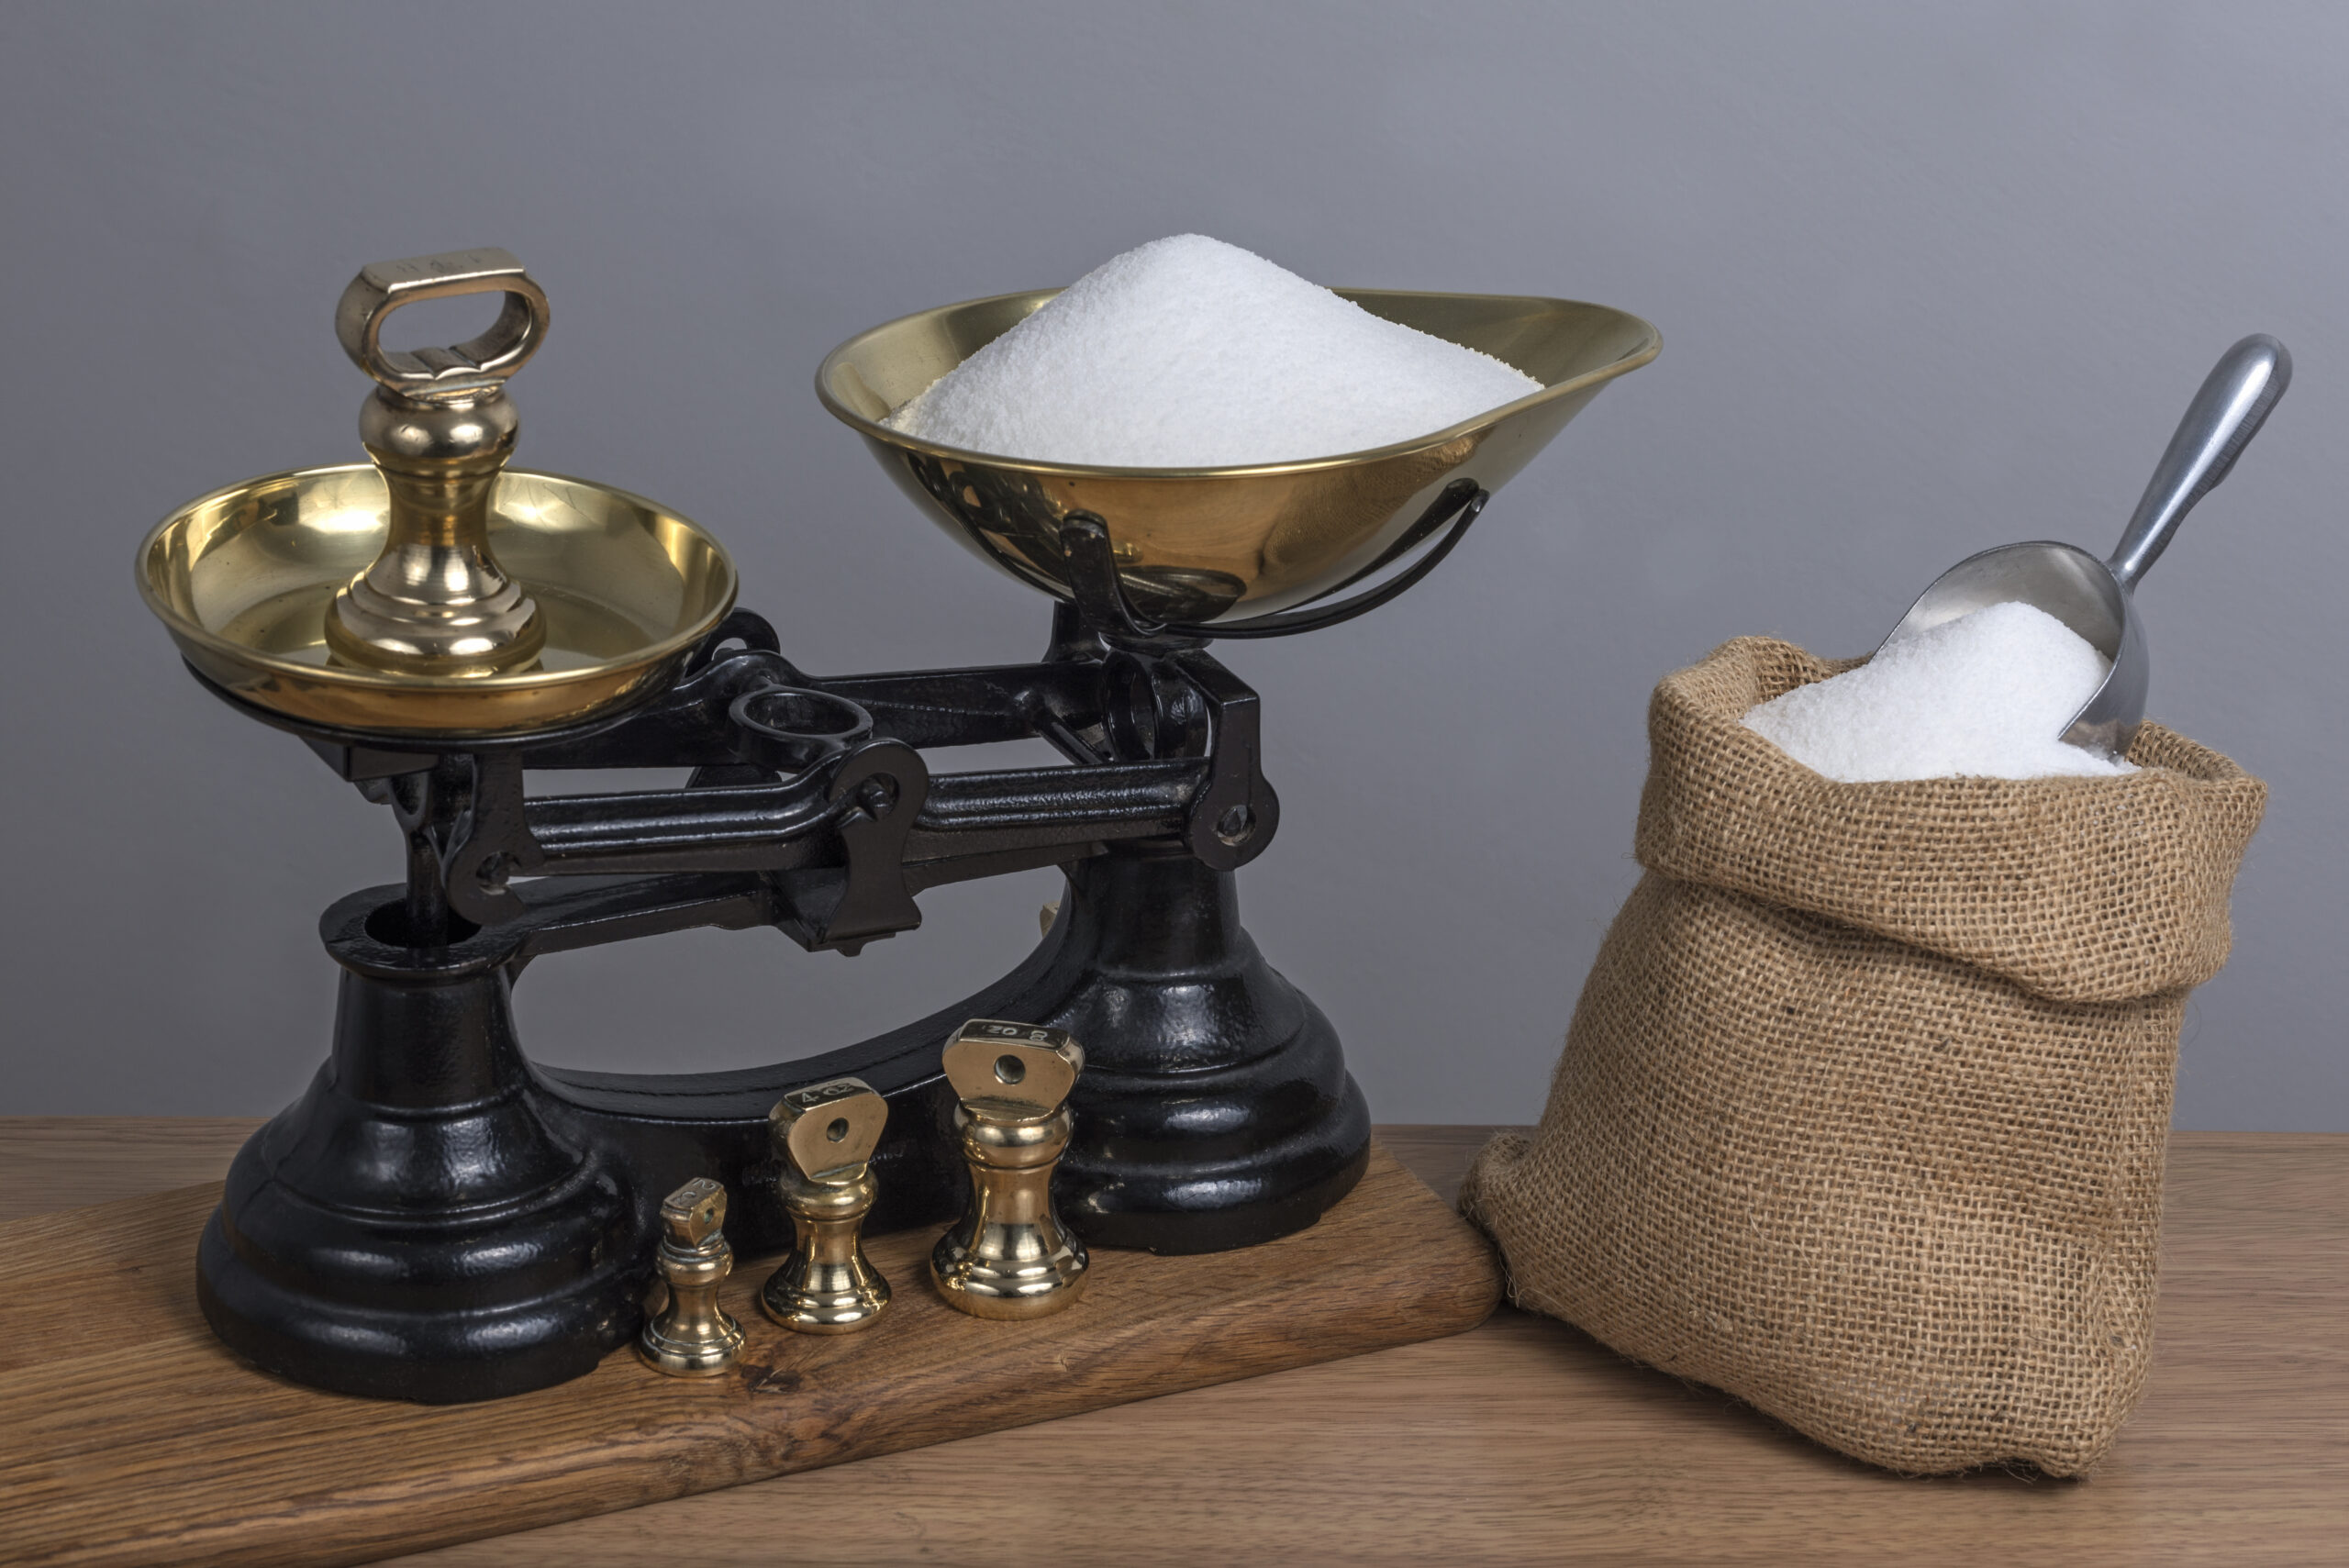 Using antique cast iron and brass scales to weigh sugar